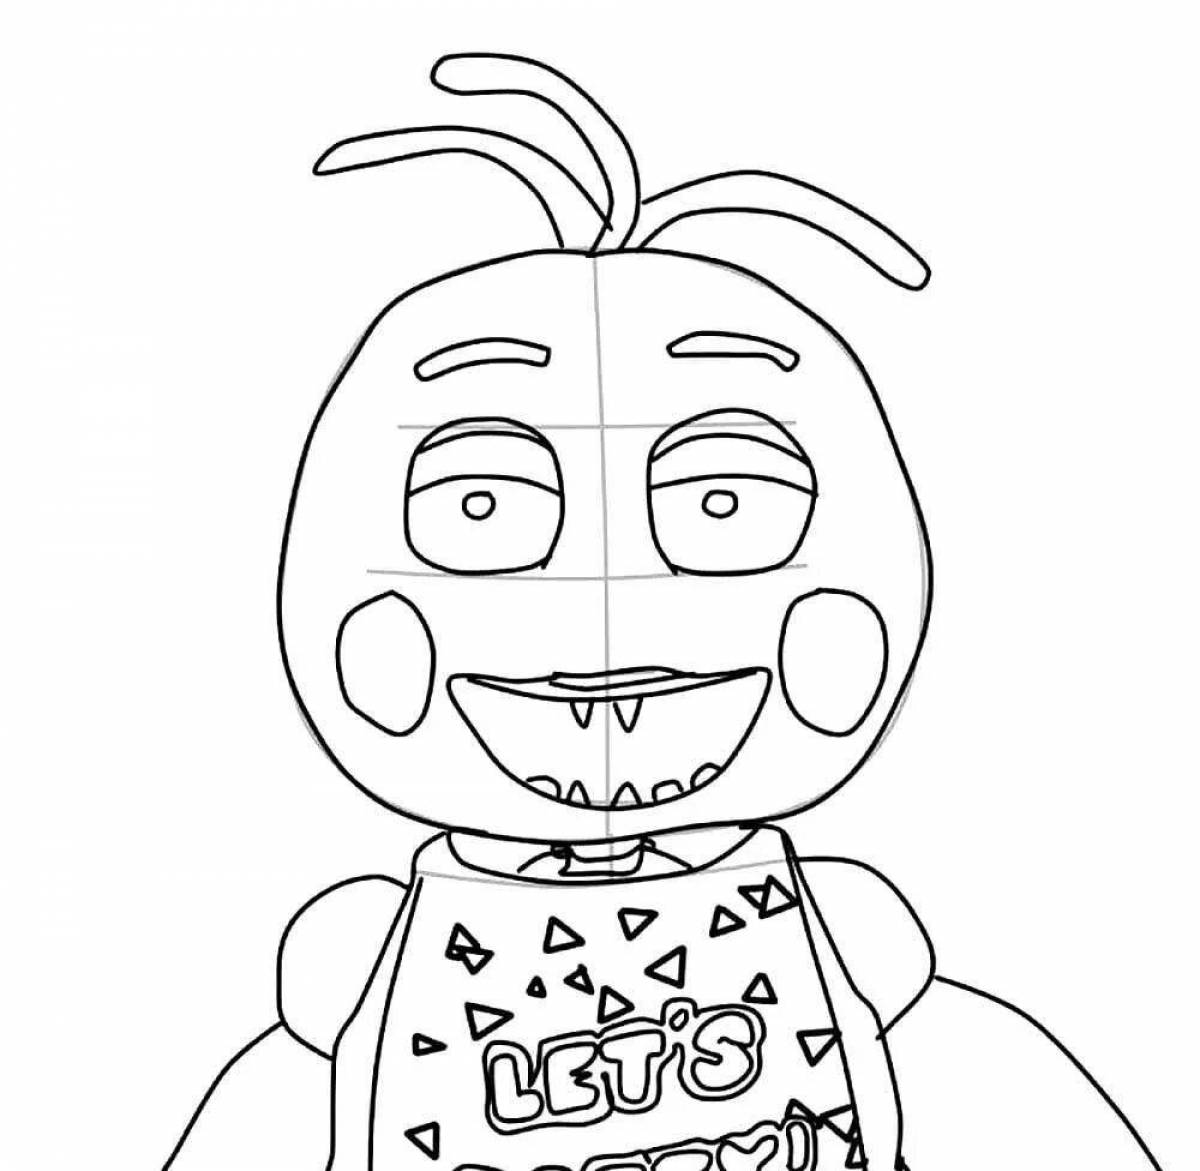 Coloring book magic toy chica